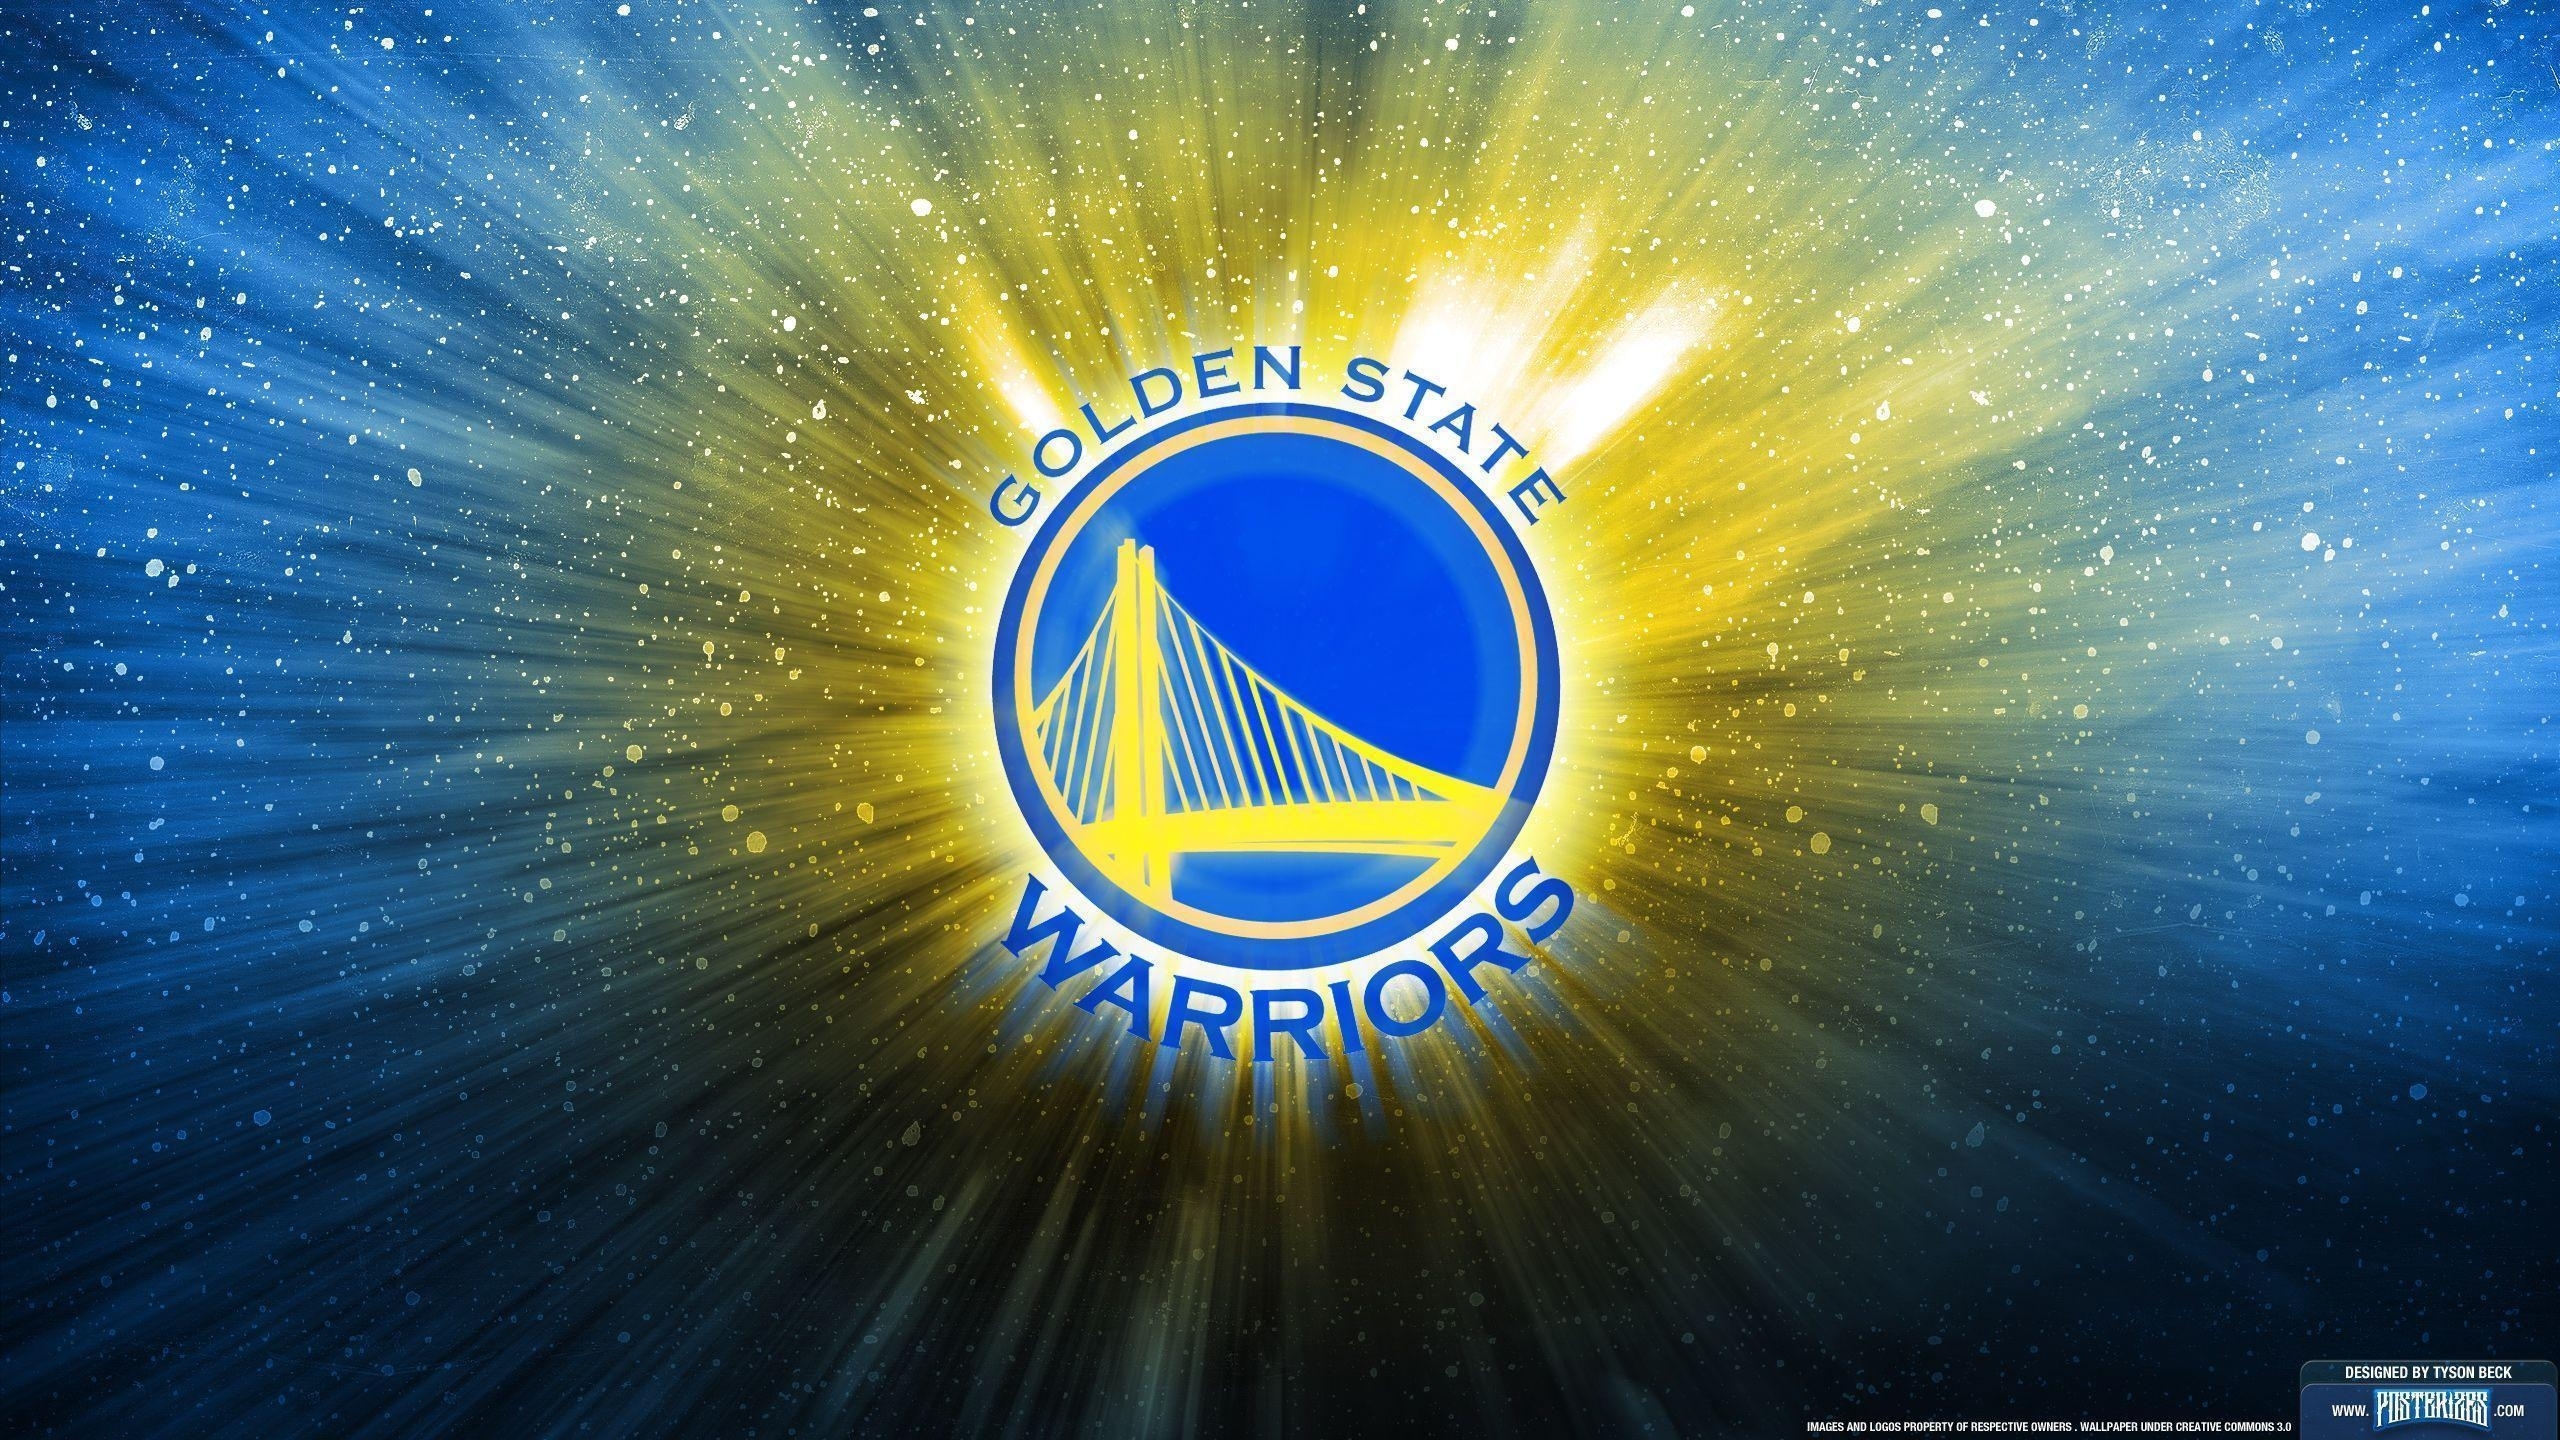 10 Latest Golden State Warriors Hd Wallpapers FULL HD 1920×1080 For PC Desktop